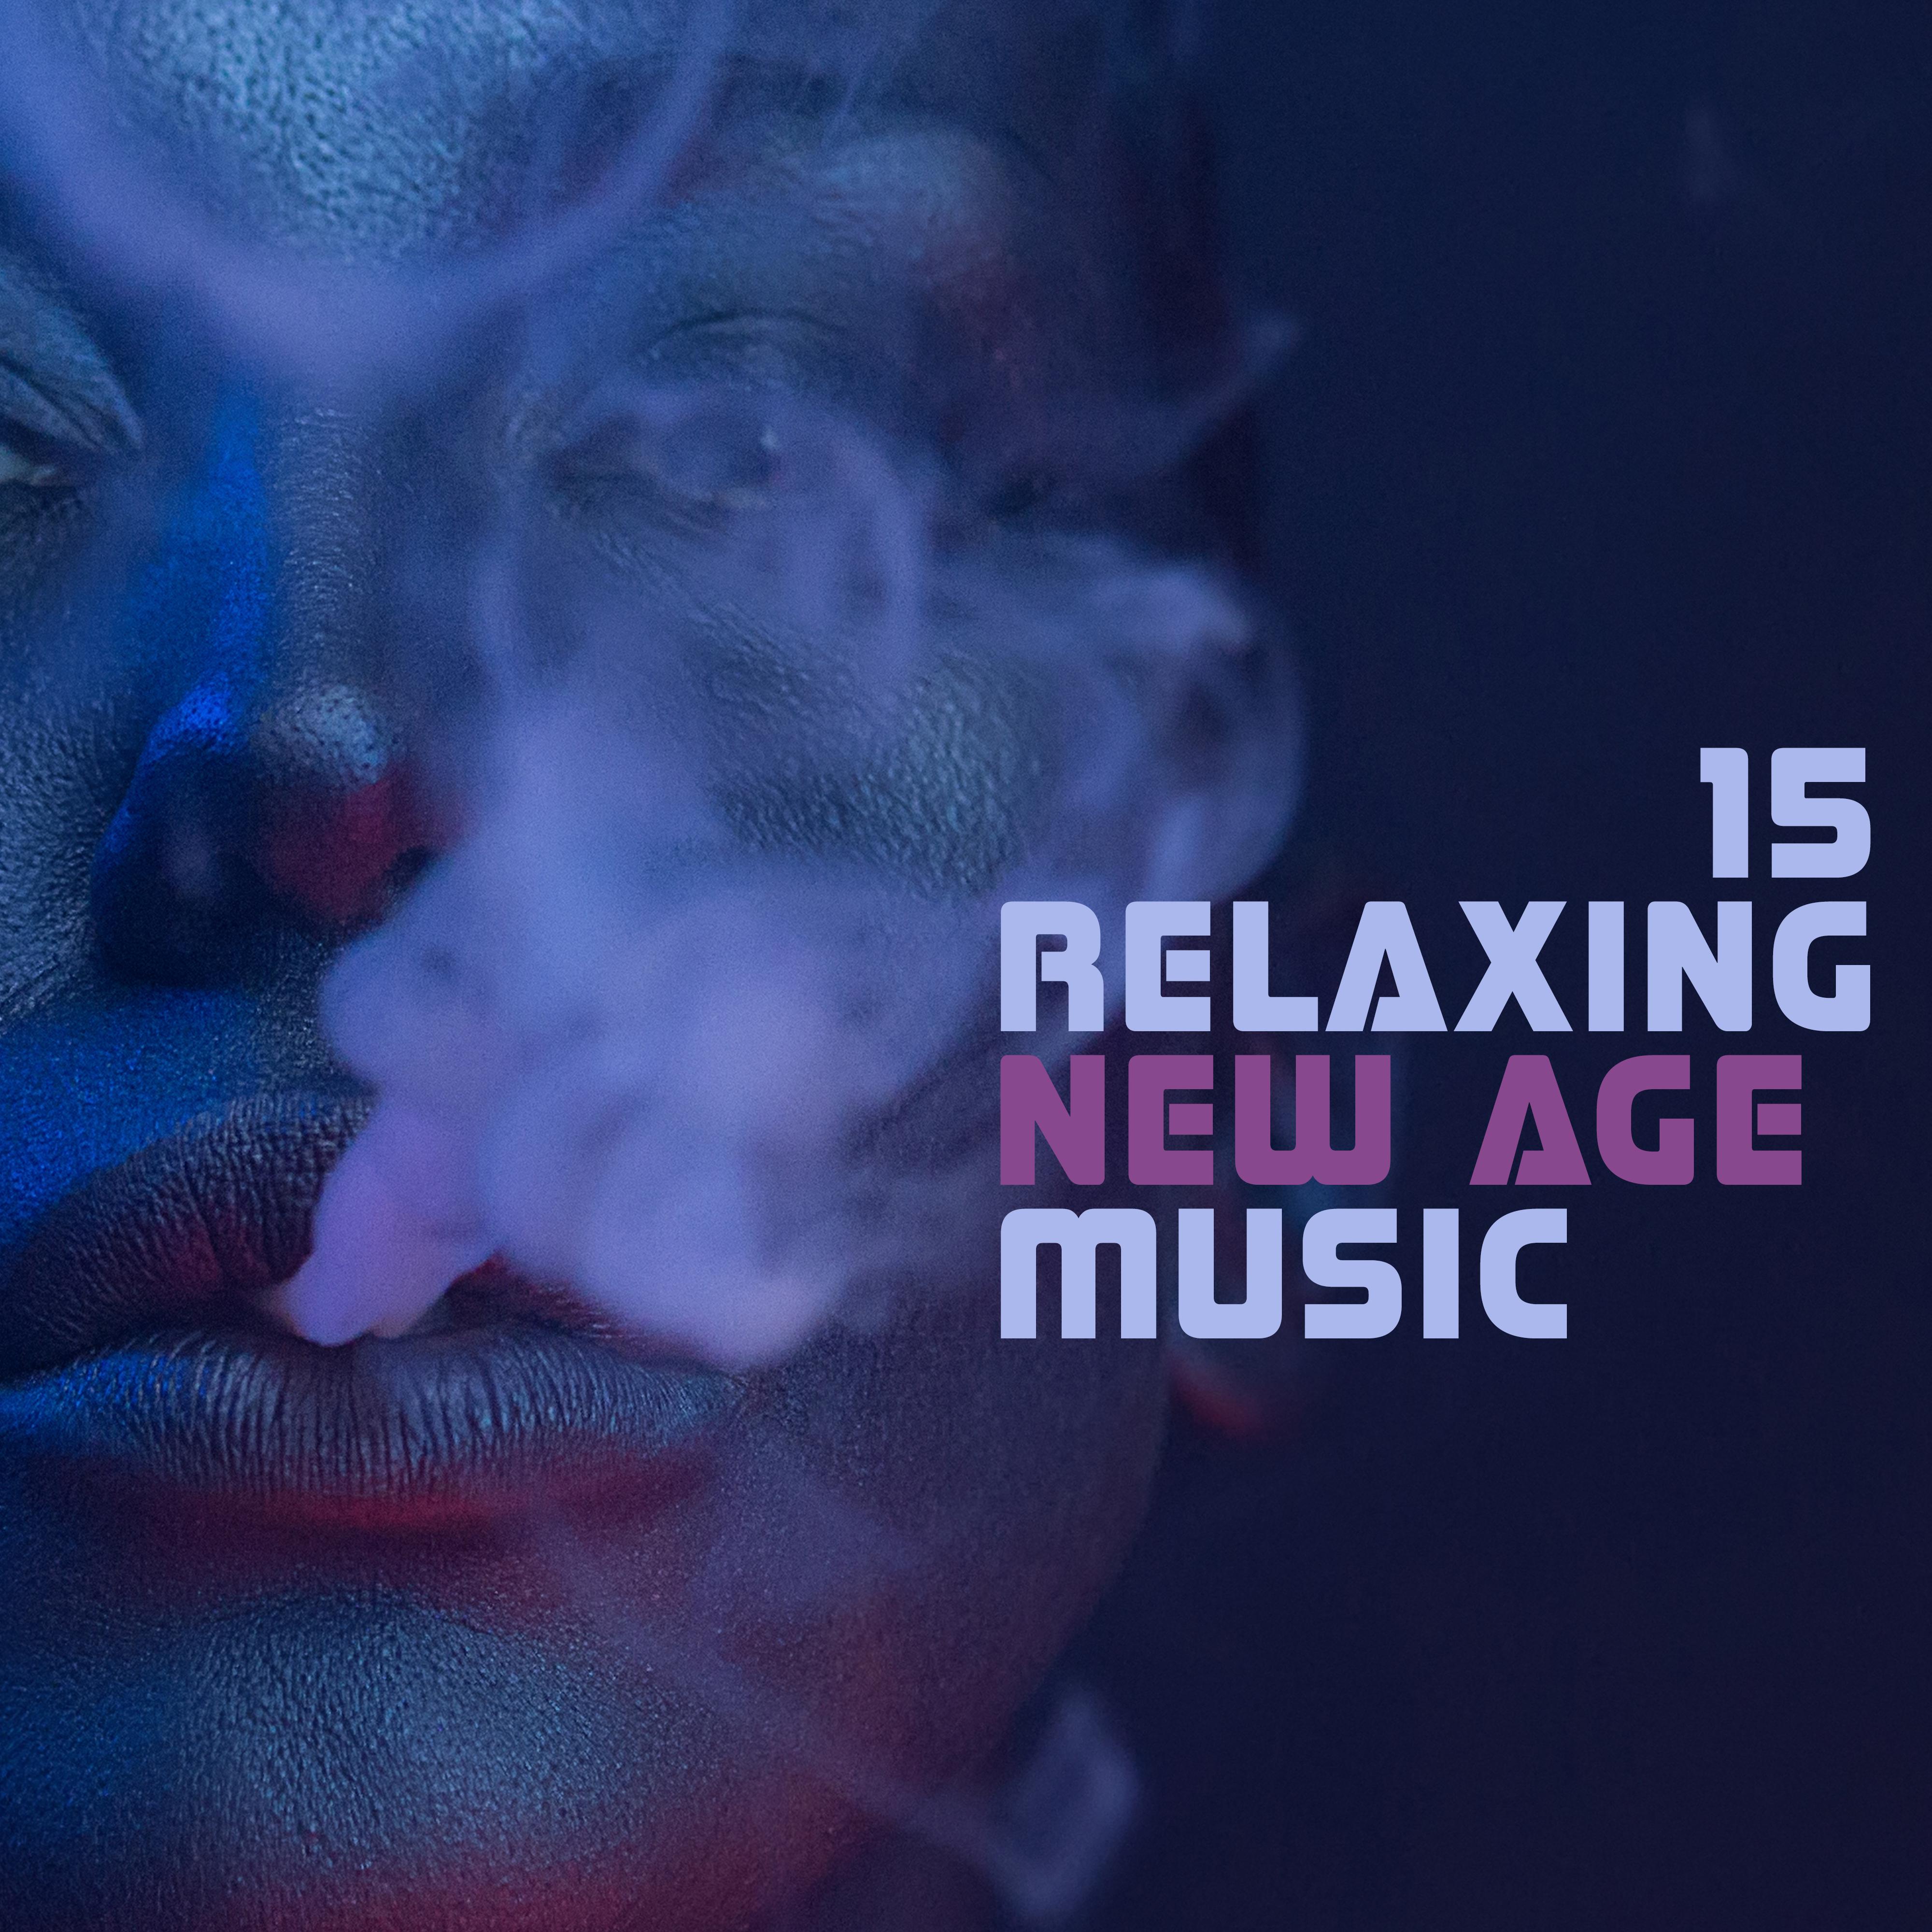 15 Relaxing New Age Music